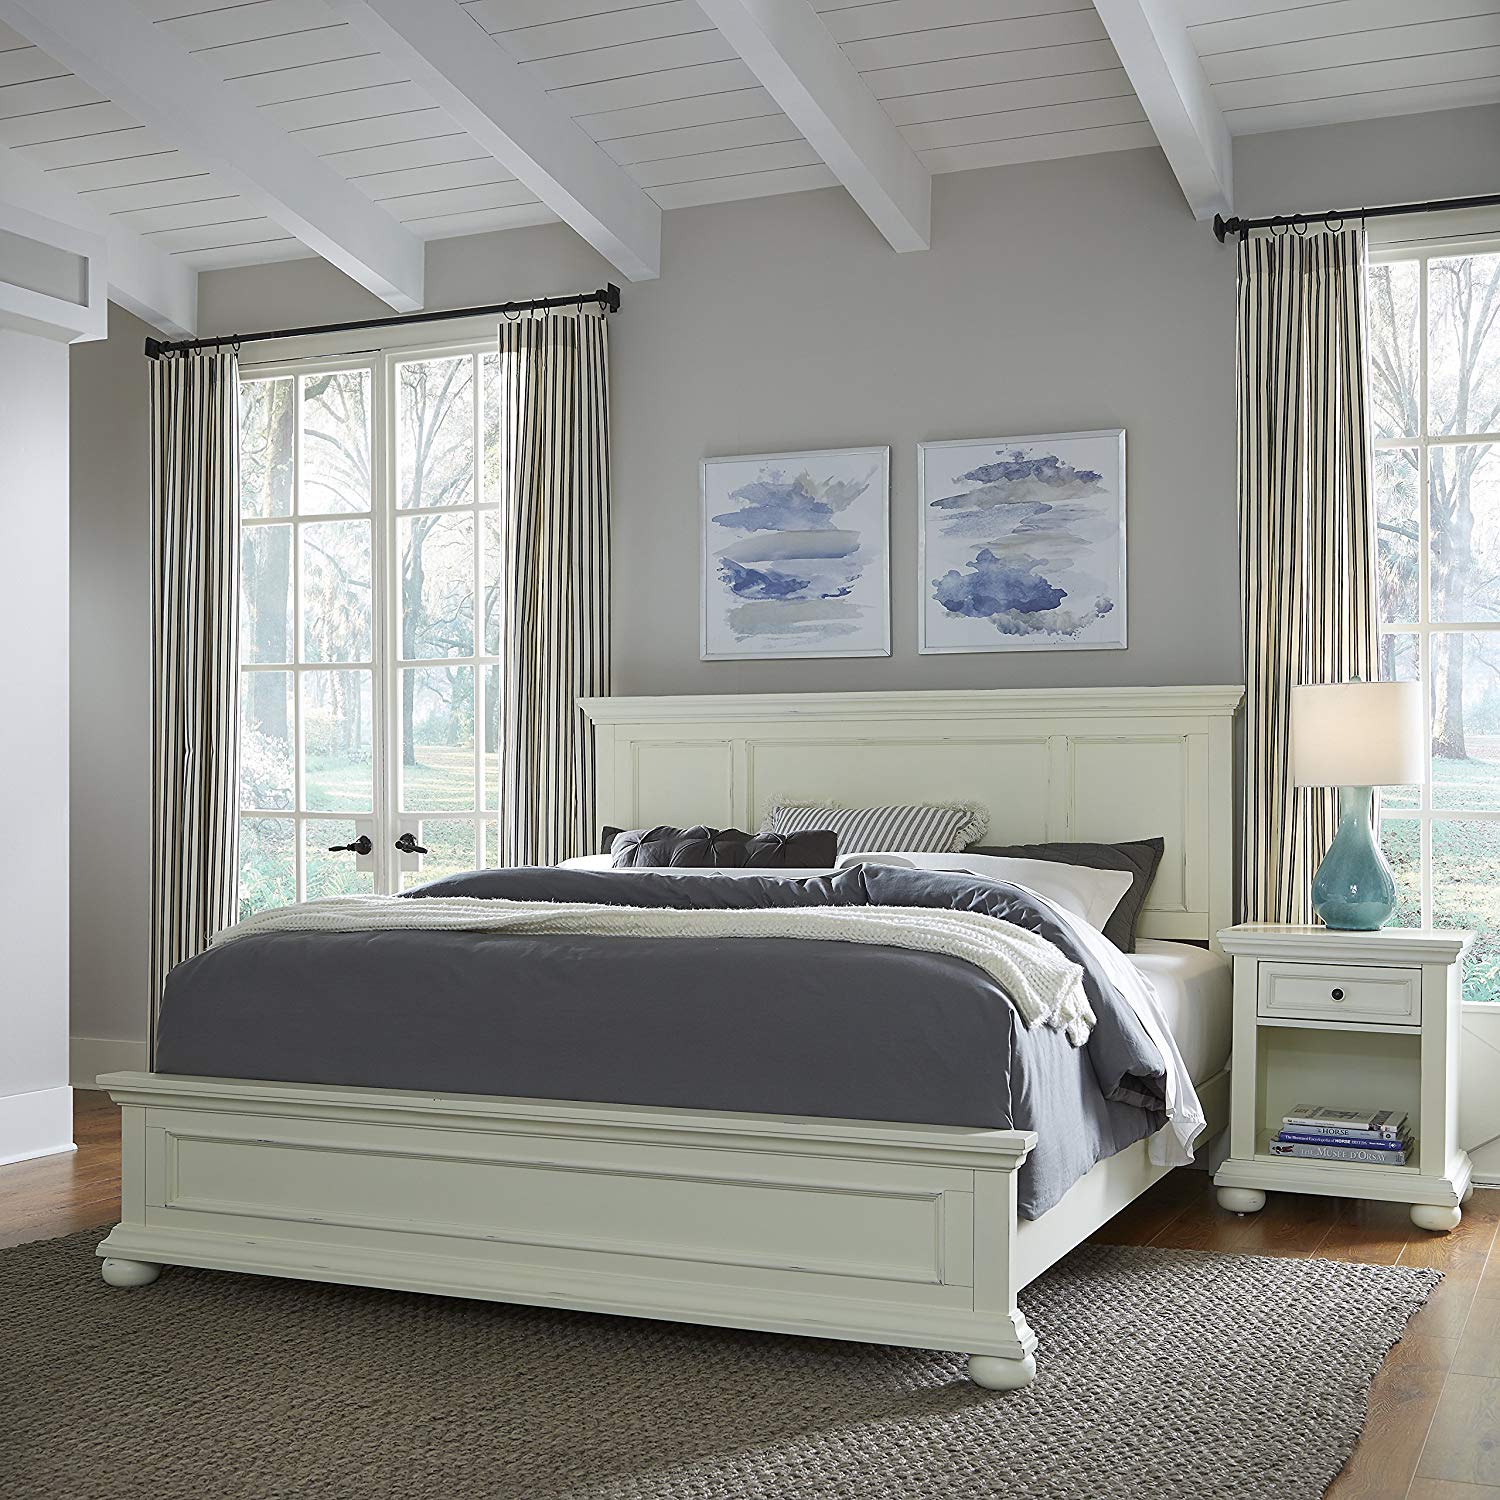 Dover White King Bed & Night Stand - image 1 of 7